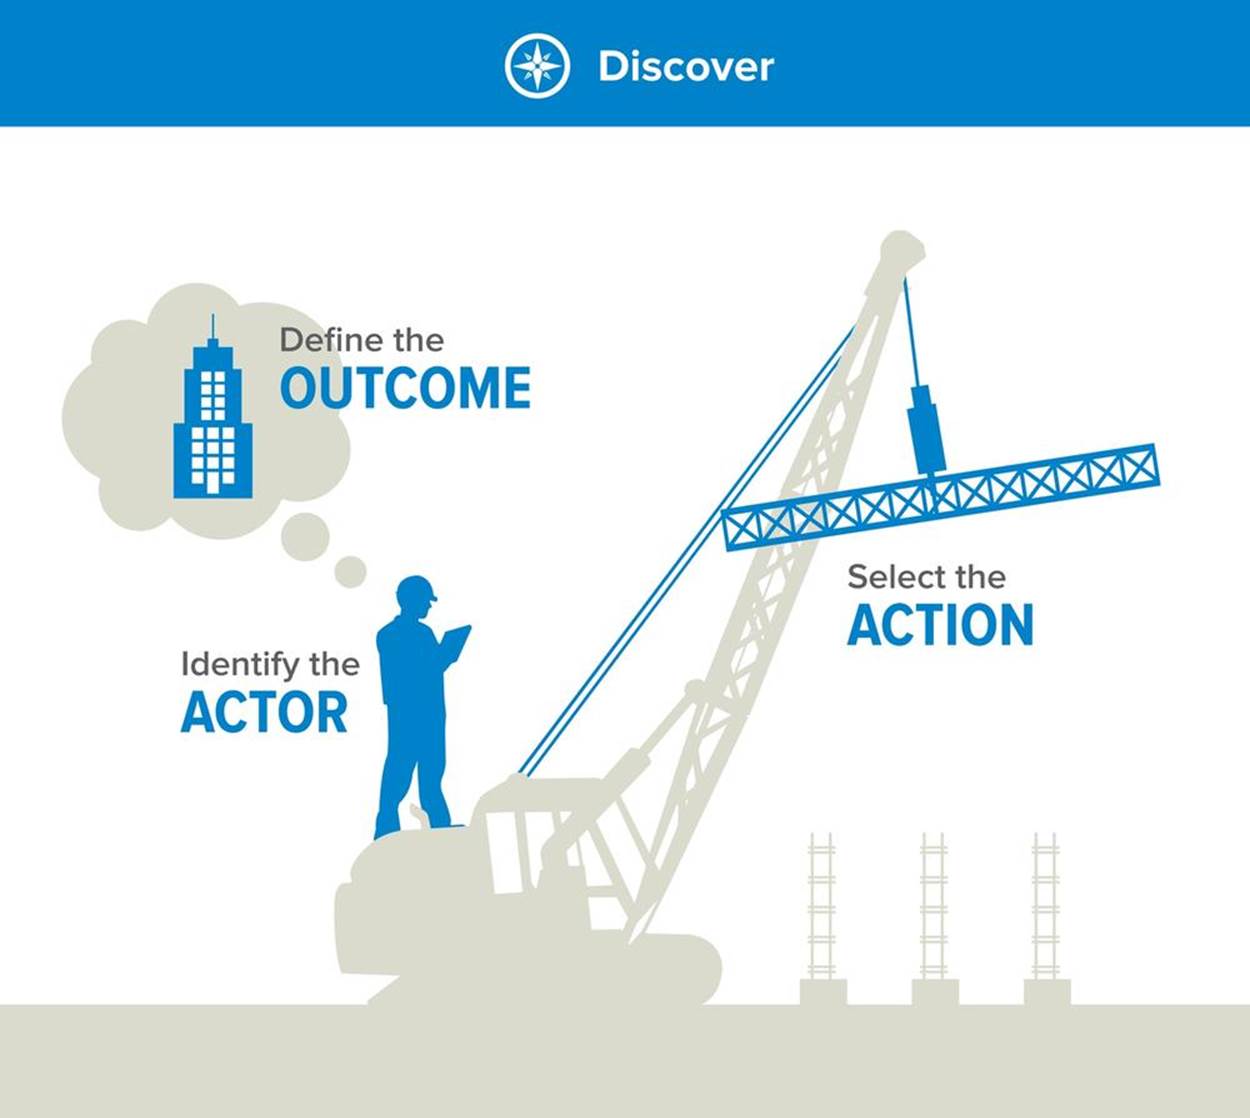 The discovery phase: your goal is to clarify the outcome, actor, and action